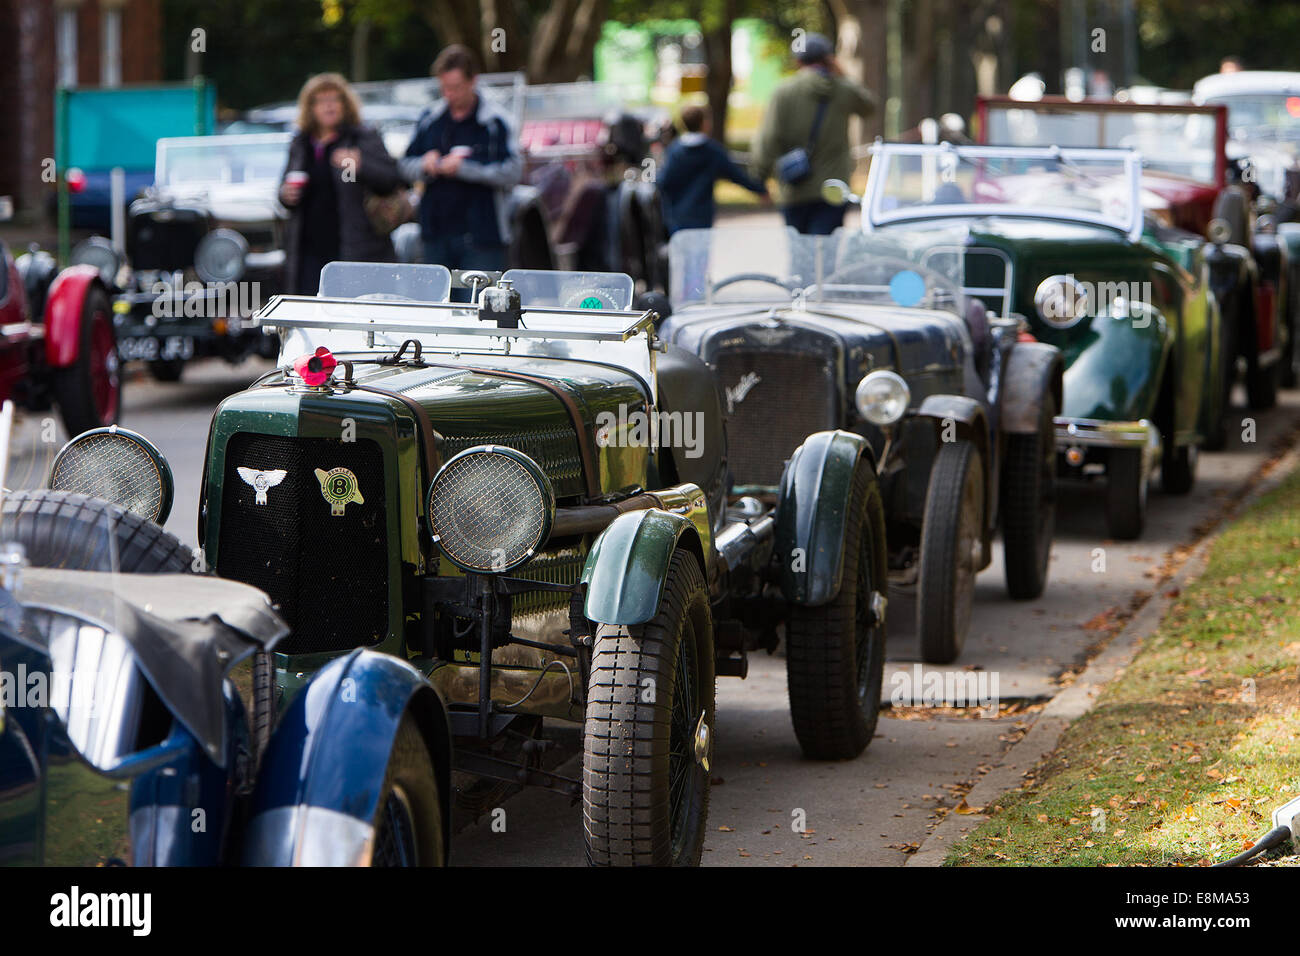 05/10/2014 BICESTER HERITAGE SUNDAY BRUNCH SCRAMBLE Vintage cars line road at former RAF Bicester site. Catchline: Sunday brunch scramble Length: pic Copy: Ben Wilkinson Pic: Damian Halliwell Picture Stock Photo